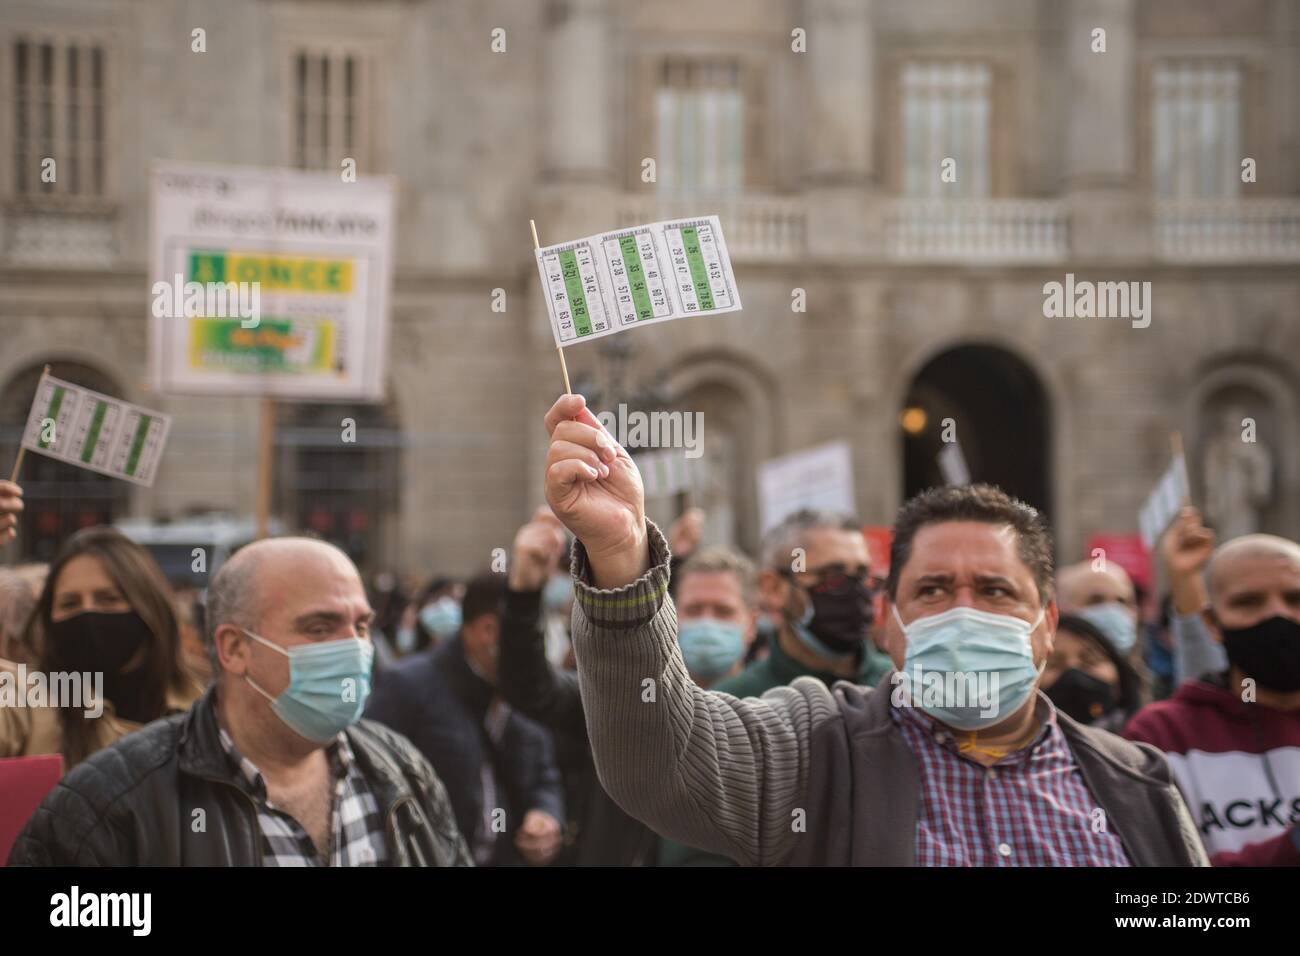 Barcelona, Catalonia, Spain. 23rd Dec, 2020. Protesters are seen with bingo tickets.Workers of Bingo and Casino of Catalonia protest in Barcelona this Wednesday, December 23, for the only daytime economic activity that remains closed due to the restrictions of the pandemic. Credit: ZUMA Press, Inc./Alamy Live News Stock Photo